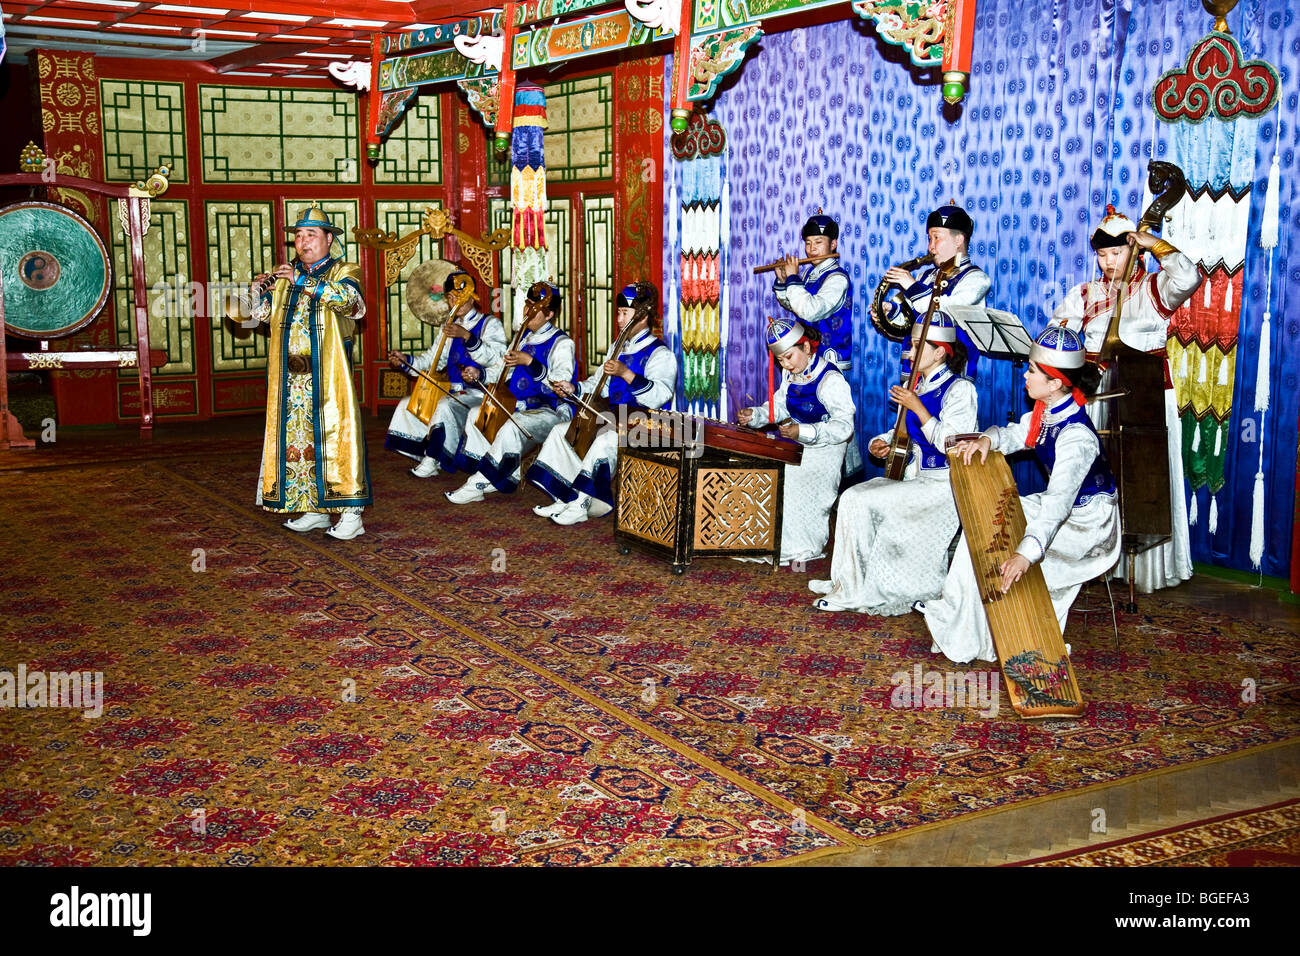 The Tumen Ekh Song and Dance Ensemble stages regular performances of traditional music and dance Ulaan Baatar Mongolia Asia Stock Photo